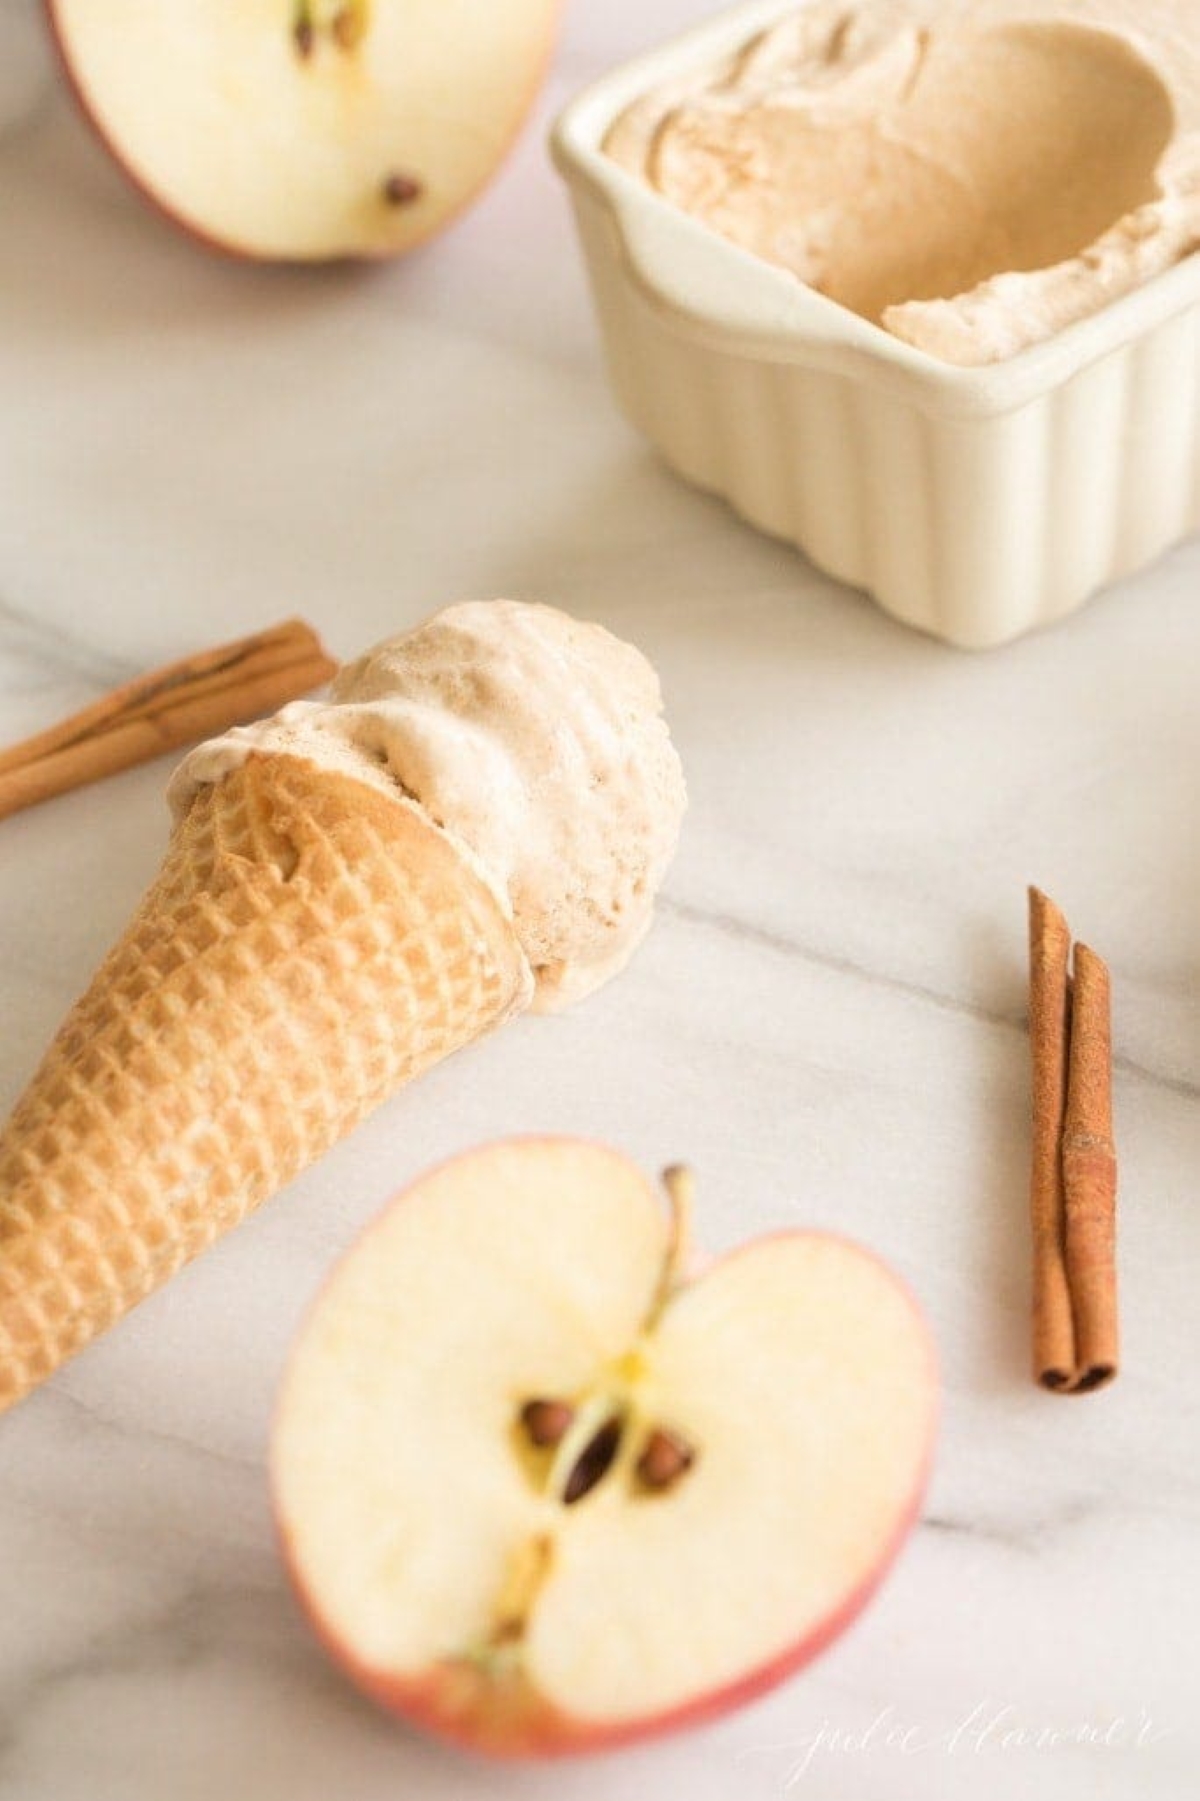 A small loaf pan full of condensed milk ice cream, surrounded by apples and cinnamon sticks.